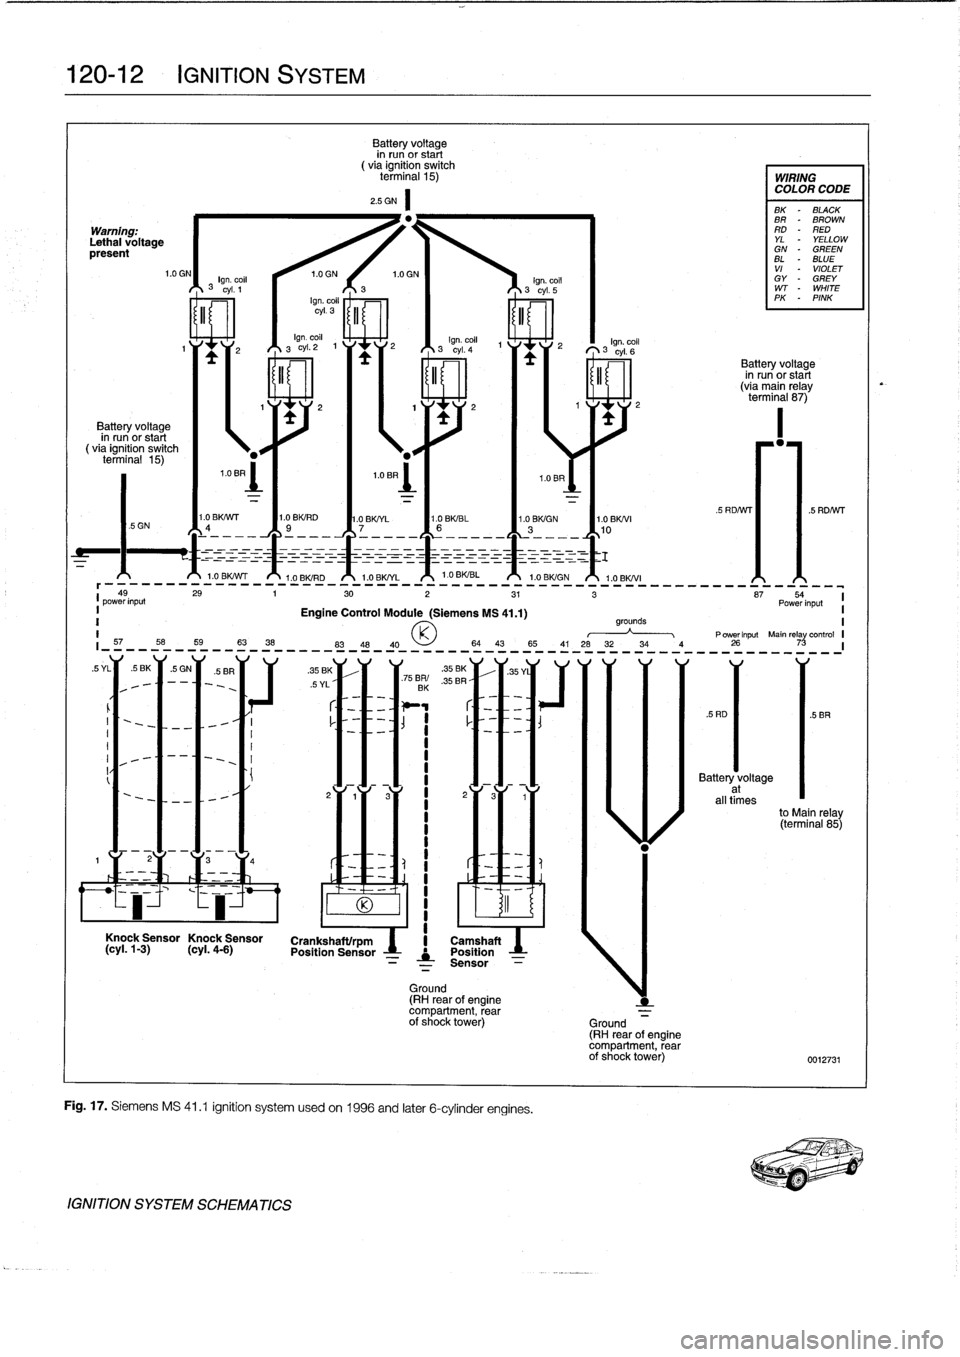 BMW 318i 1996 E36 Service Manual 
120-12

	

IGNITION
SYSTEM

Warning
.
Lethal
voltagepresent

Battery
voltage
in
run
or
start
(via
ignitíon
switch
terminal
15)

I
t

IGNITION
SYSTEM
SCHEMATICS

Battery
voltage
in
run
or
start
(
via